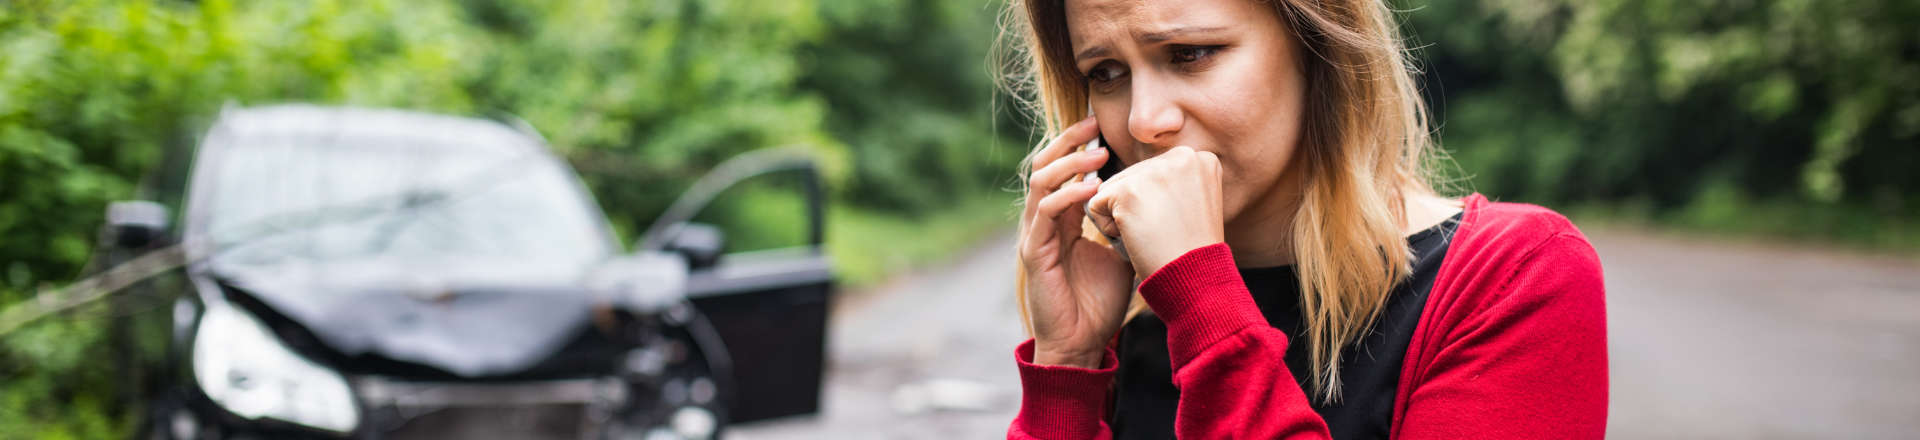 a stressed woman outside a crashed car talking on the phone